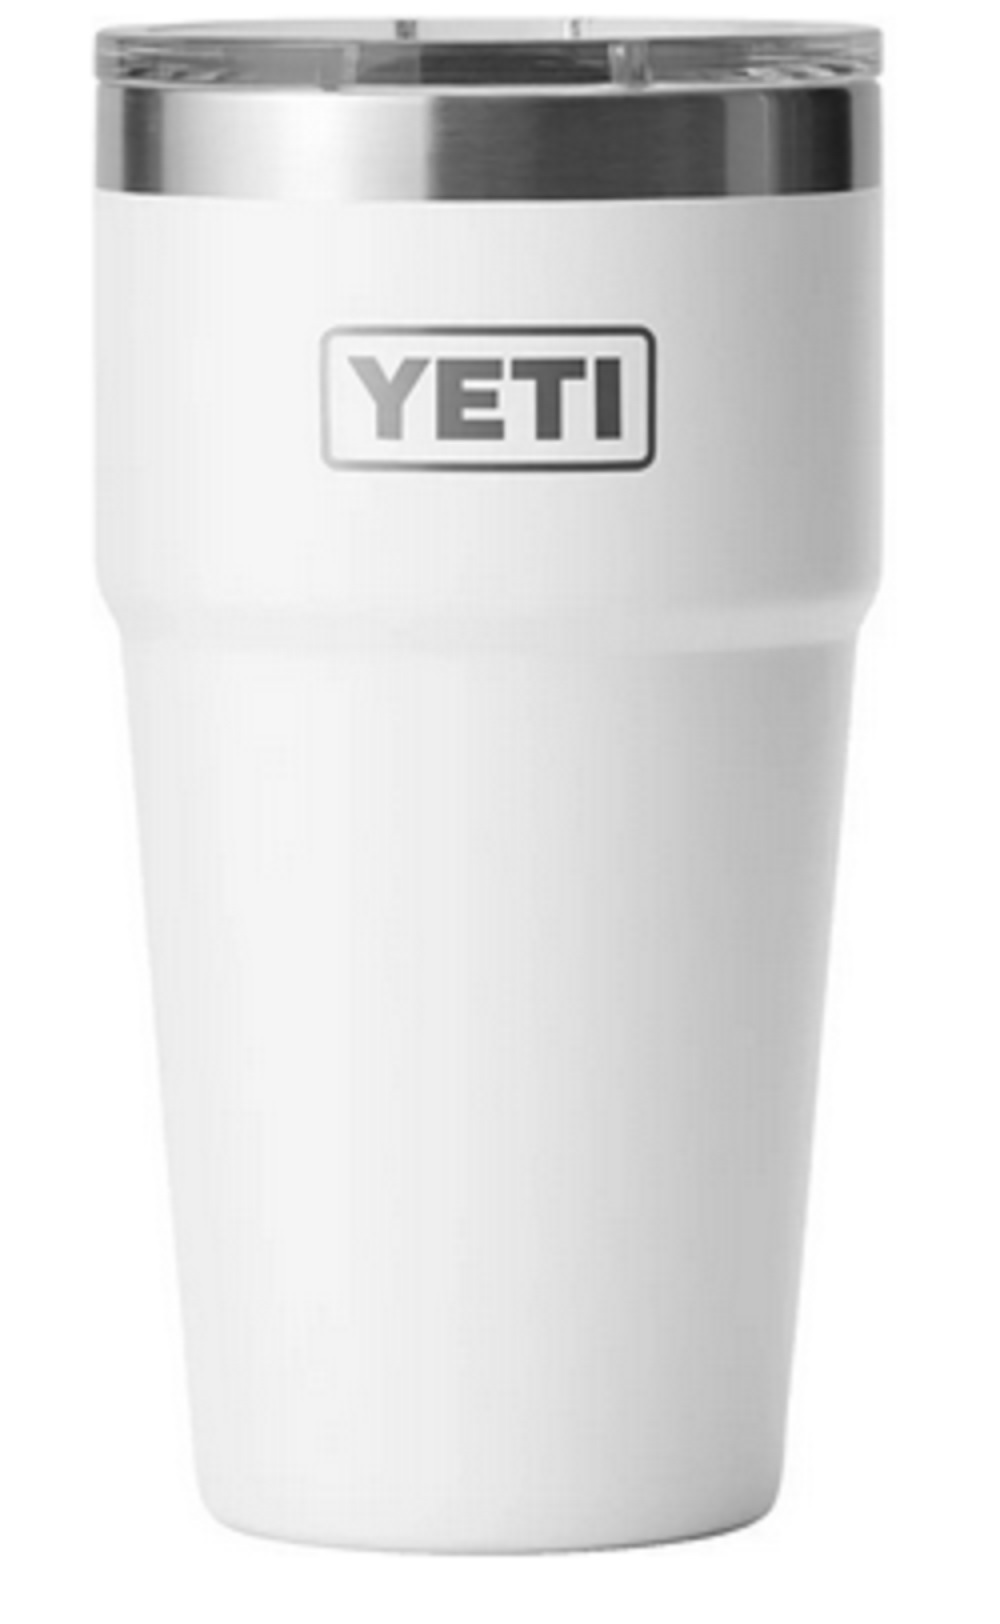 Yeti 20oz. Stackable Cup with MagSlider Lid